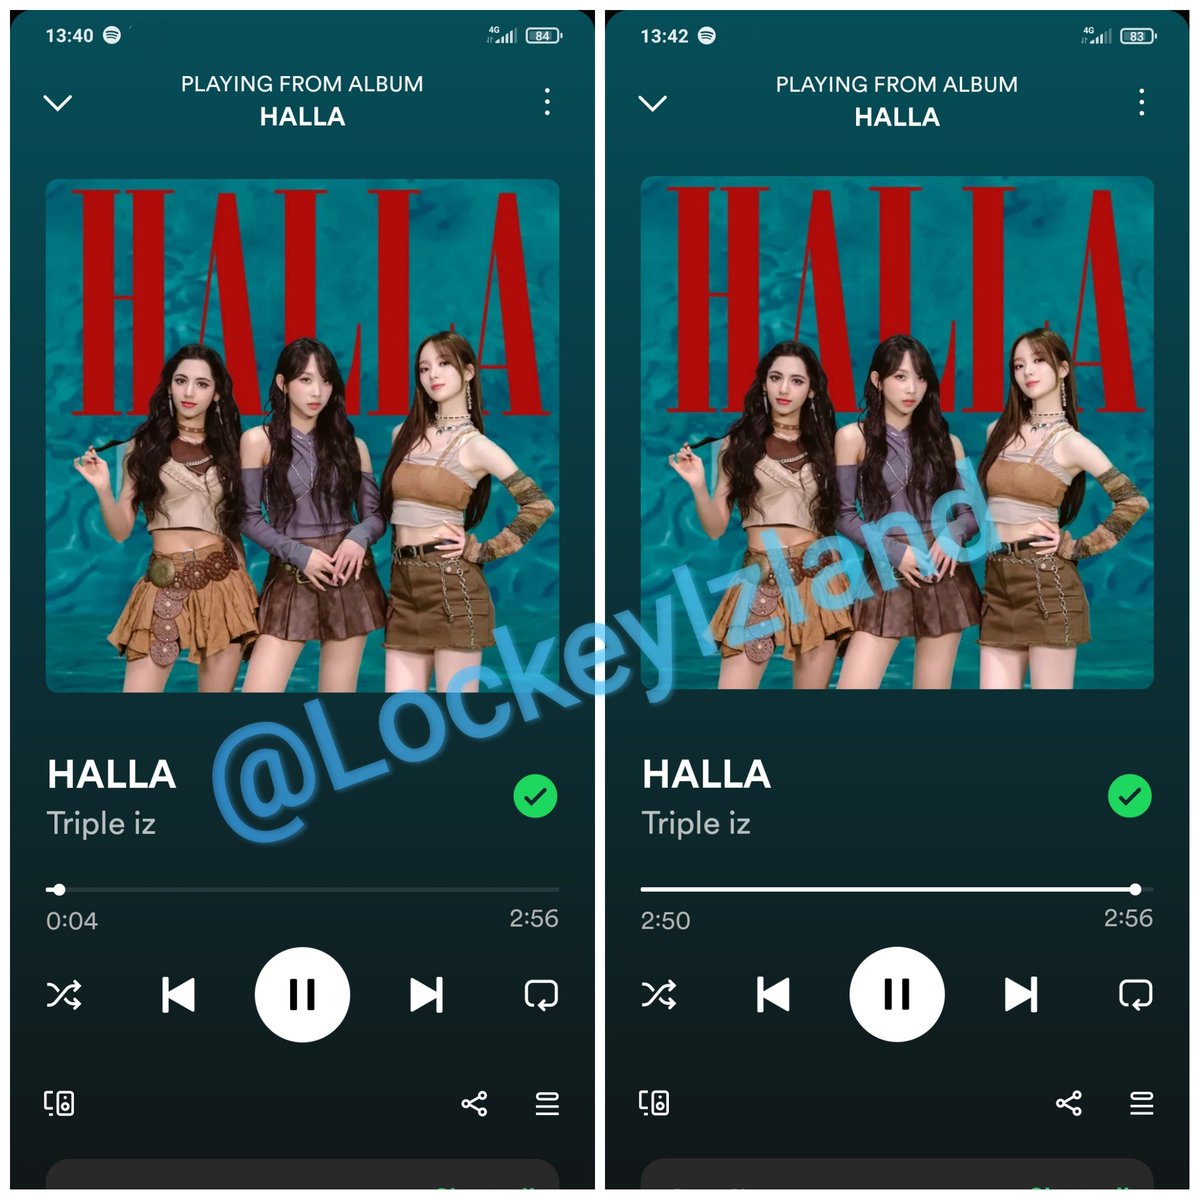 Halla have a unique vibes. With cantchy chorus, it's make everyone who listened easy to sing it. And everyone will join to dance because Halla bring  Moombahton rhythm in. Thank you for your hard work Triple Iz @TripleIz_twt and team. I enjoy HALLA so much ❤ #Triple_Iz_HALLA